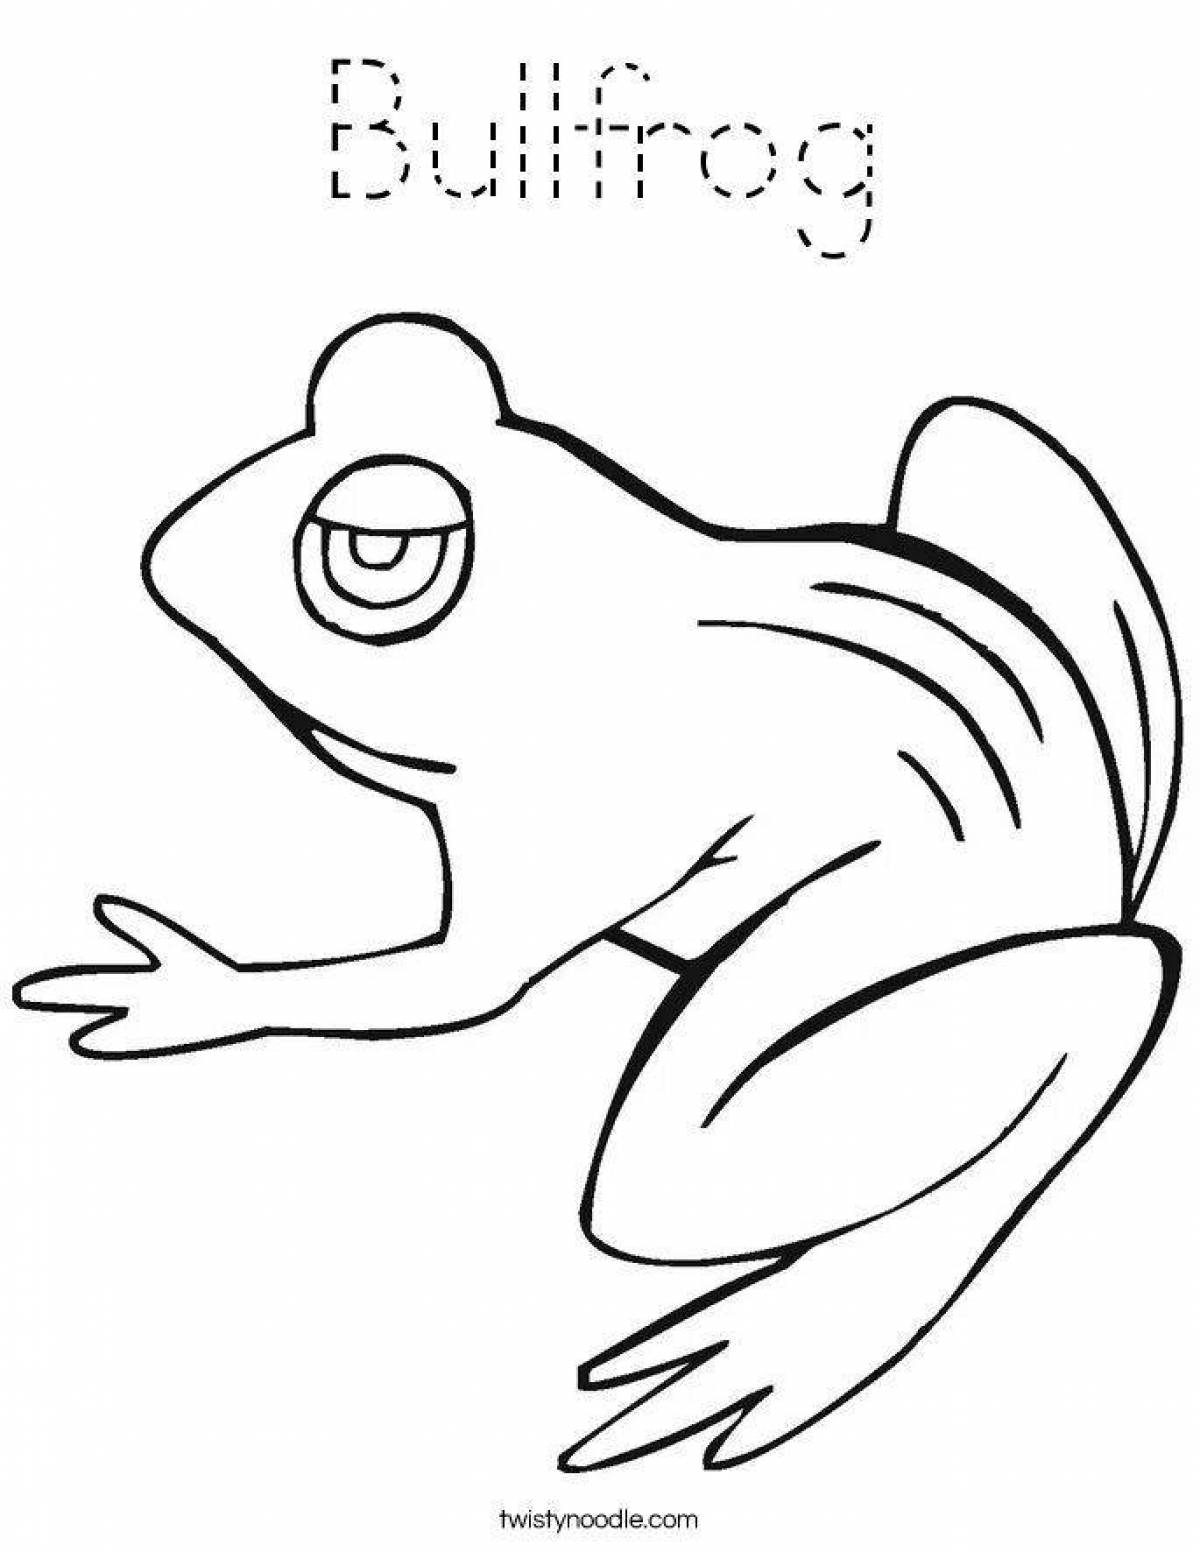 Color-explosion pepe the frog coloring page